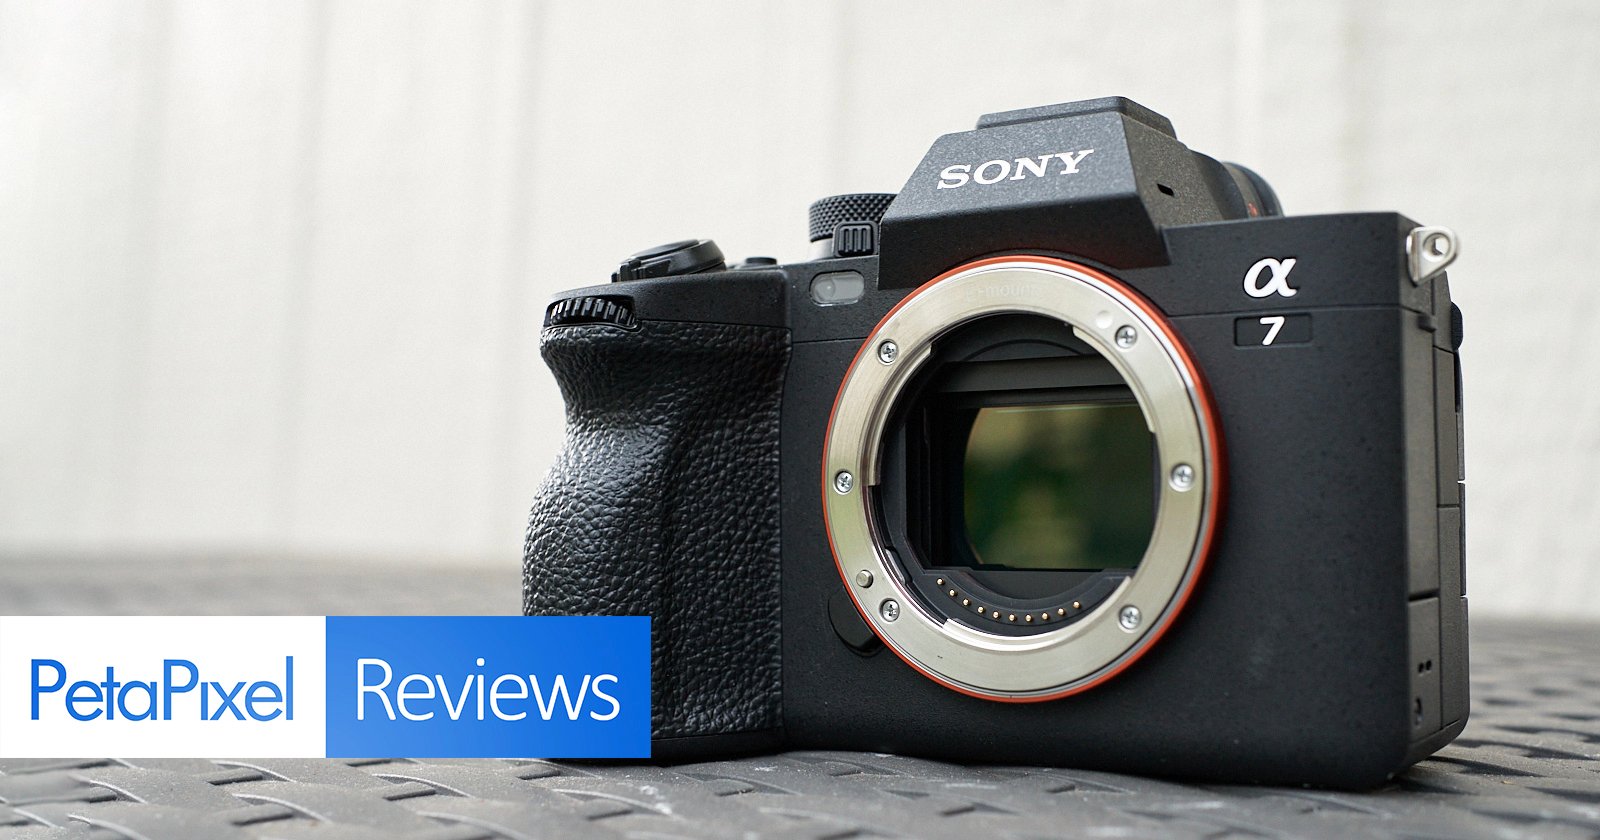 Sony launches fourth generation Alpha 7 full-frame mirrorless camera